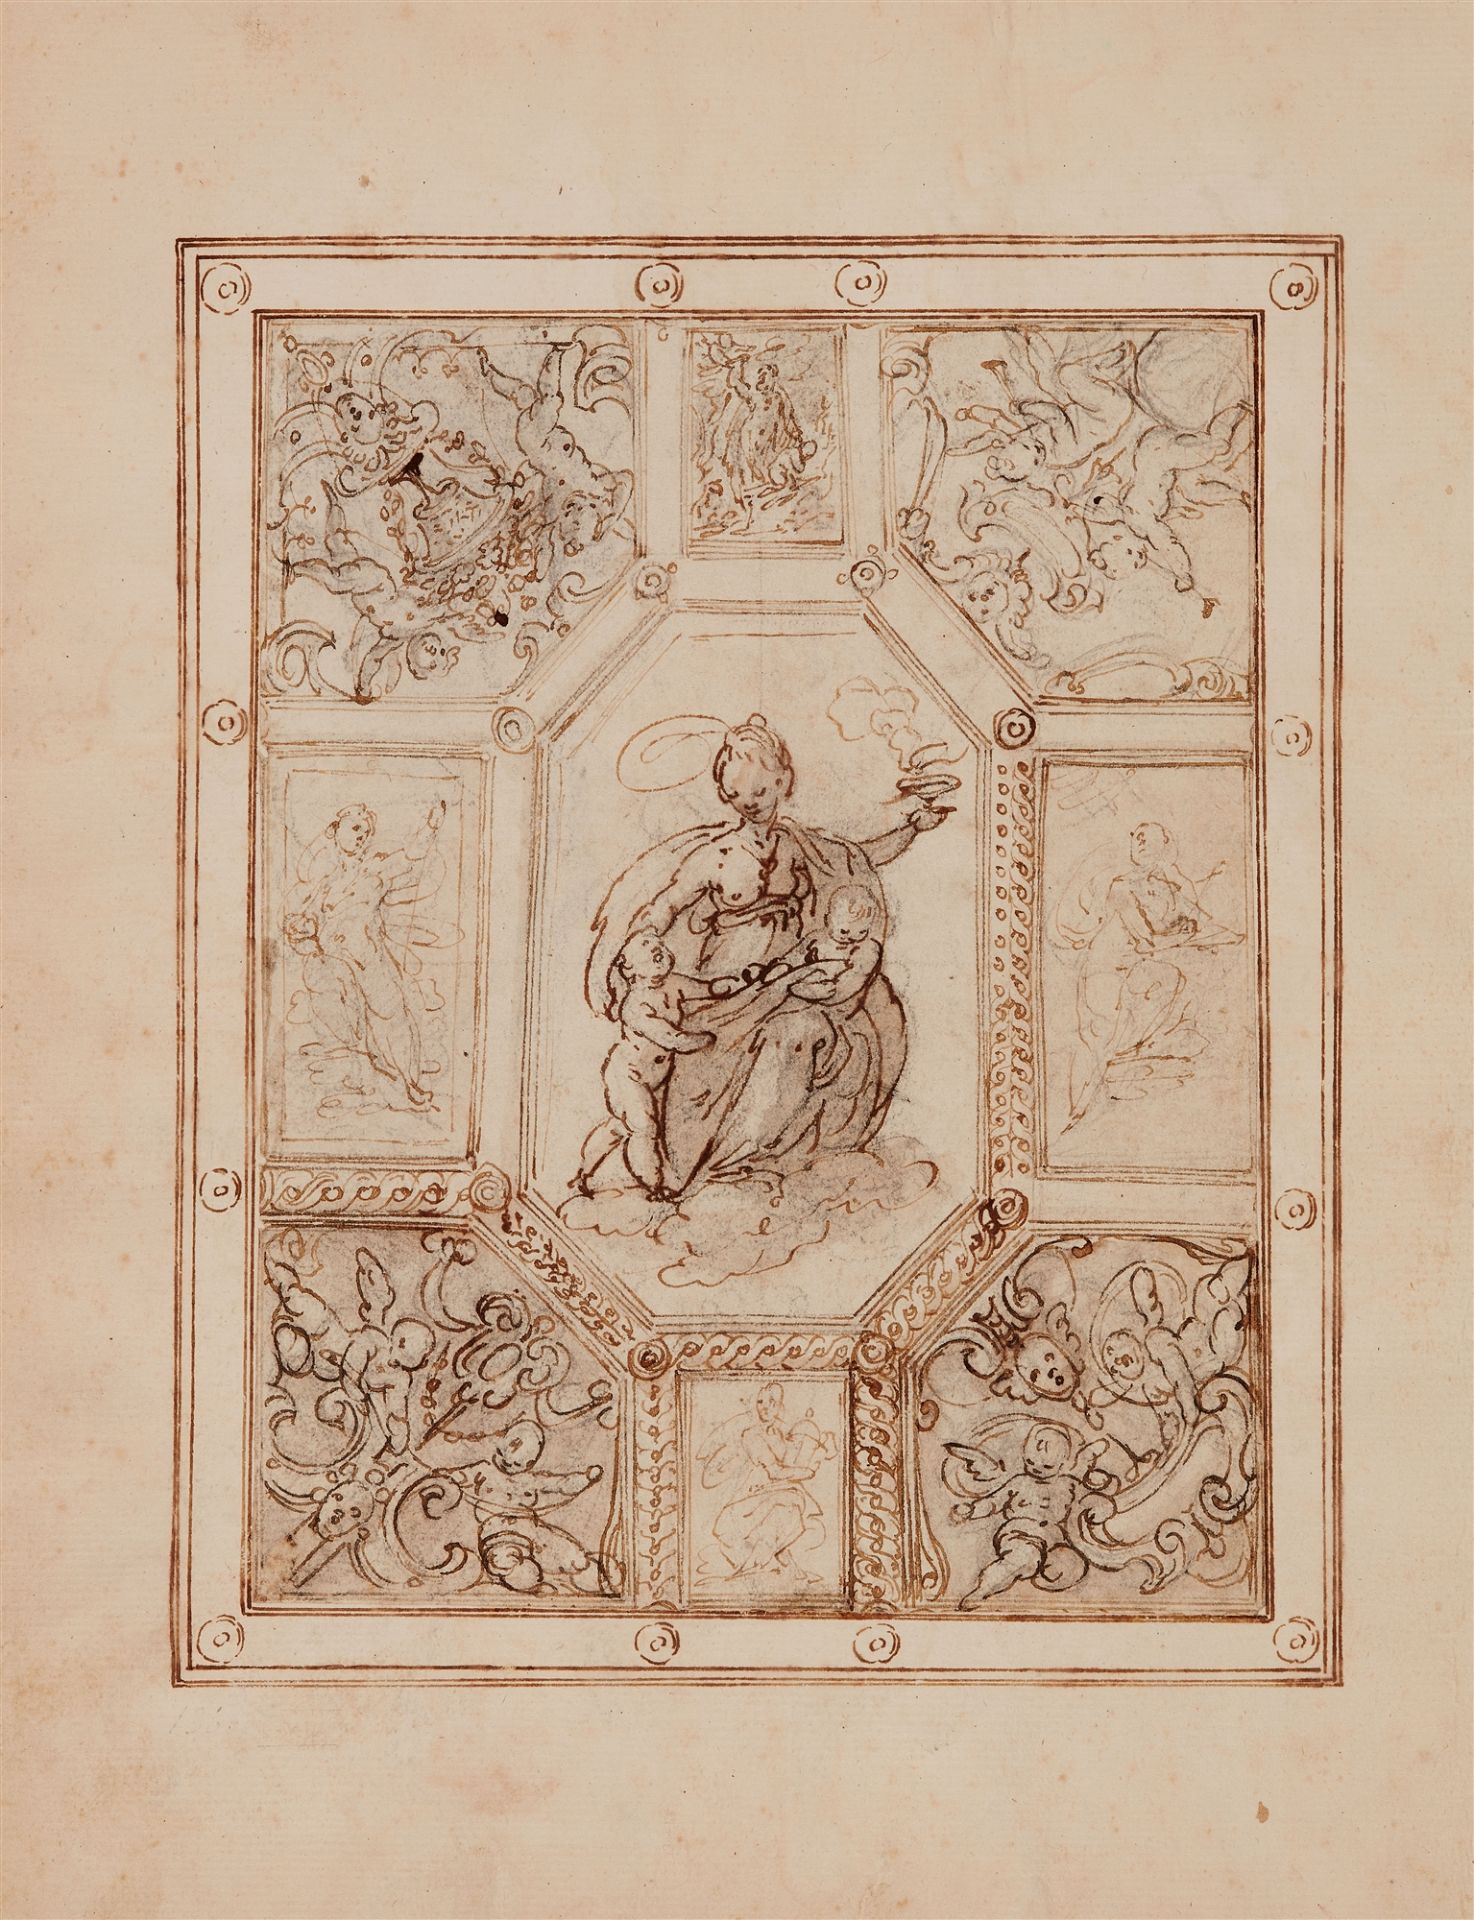 Genoese School 17th century, Study for a Ceiling Decoration